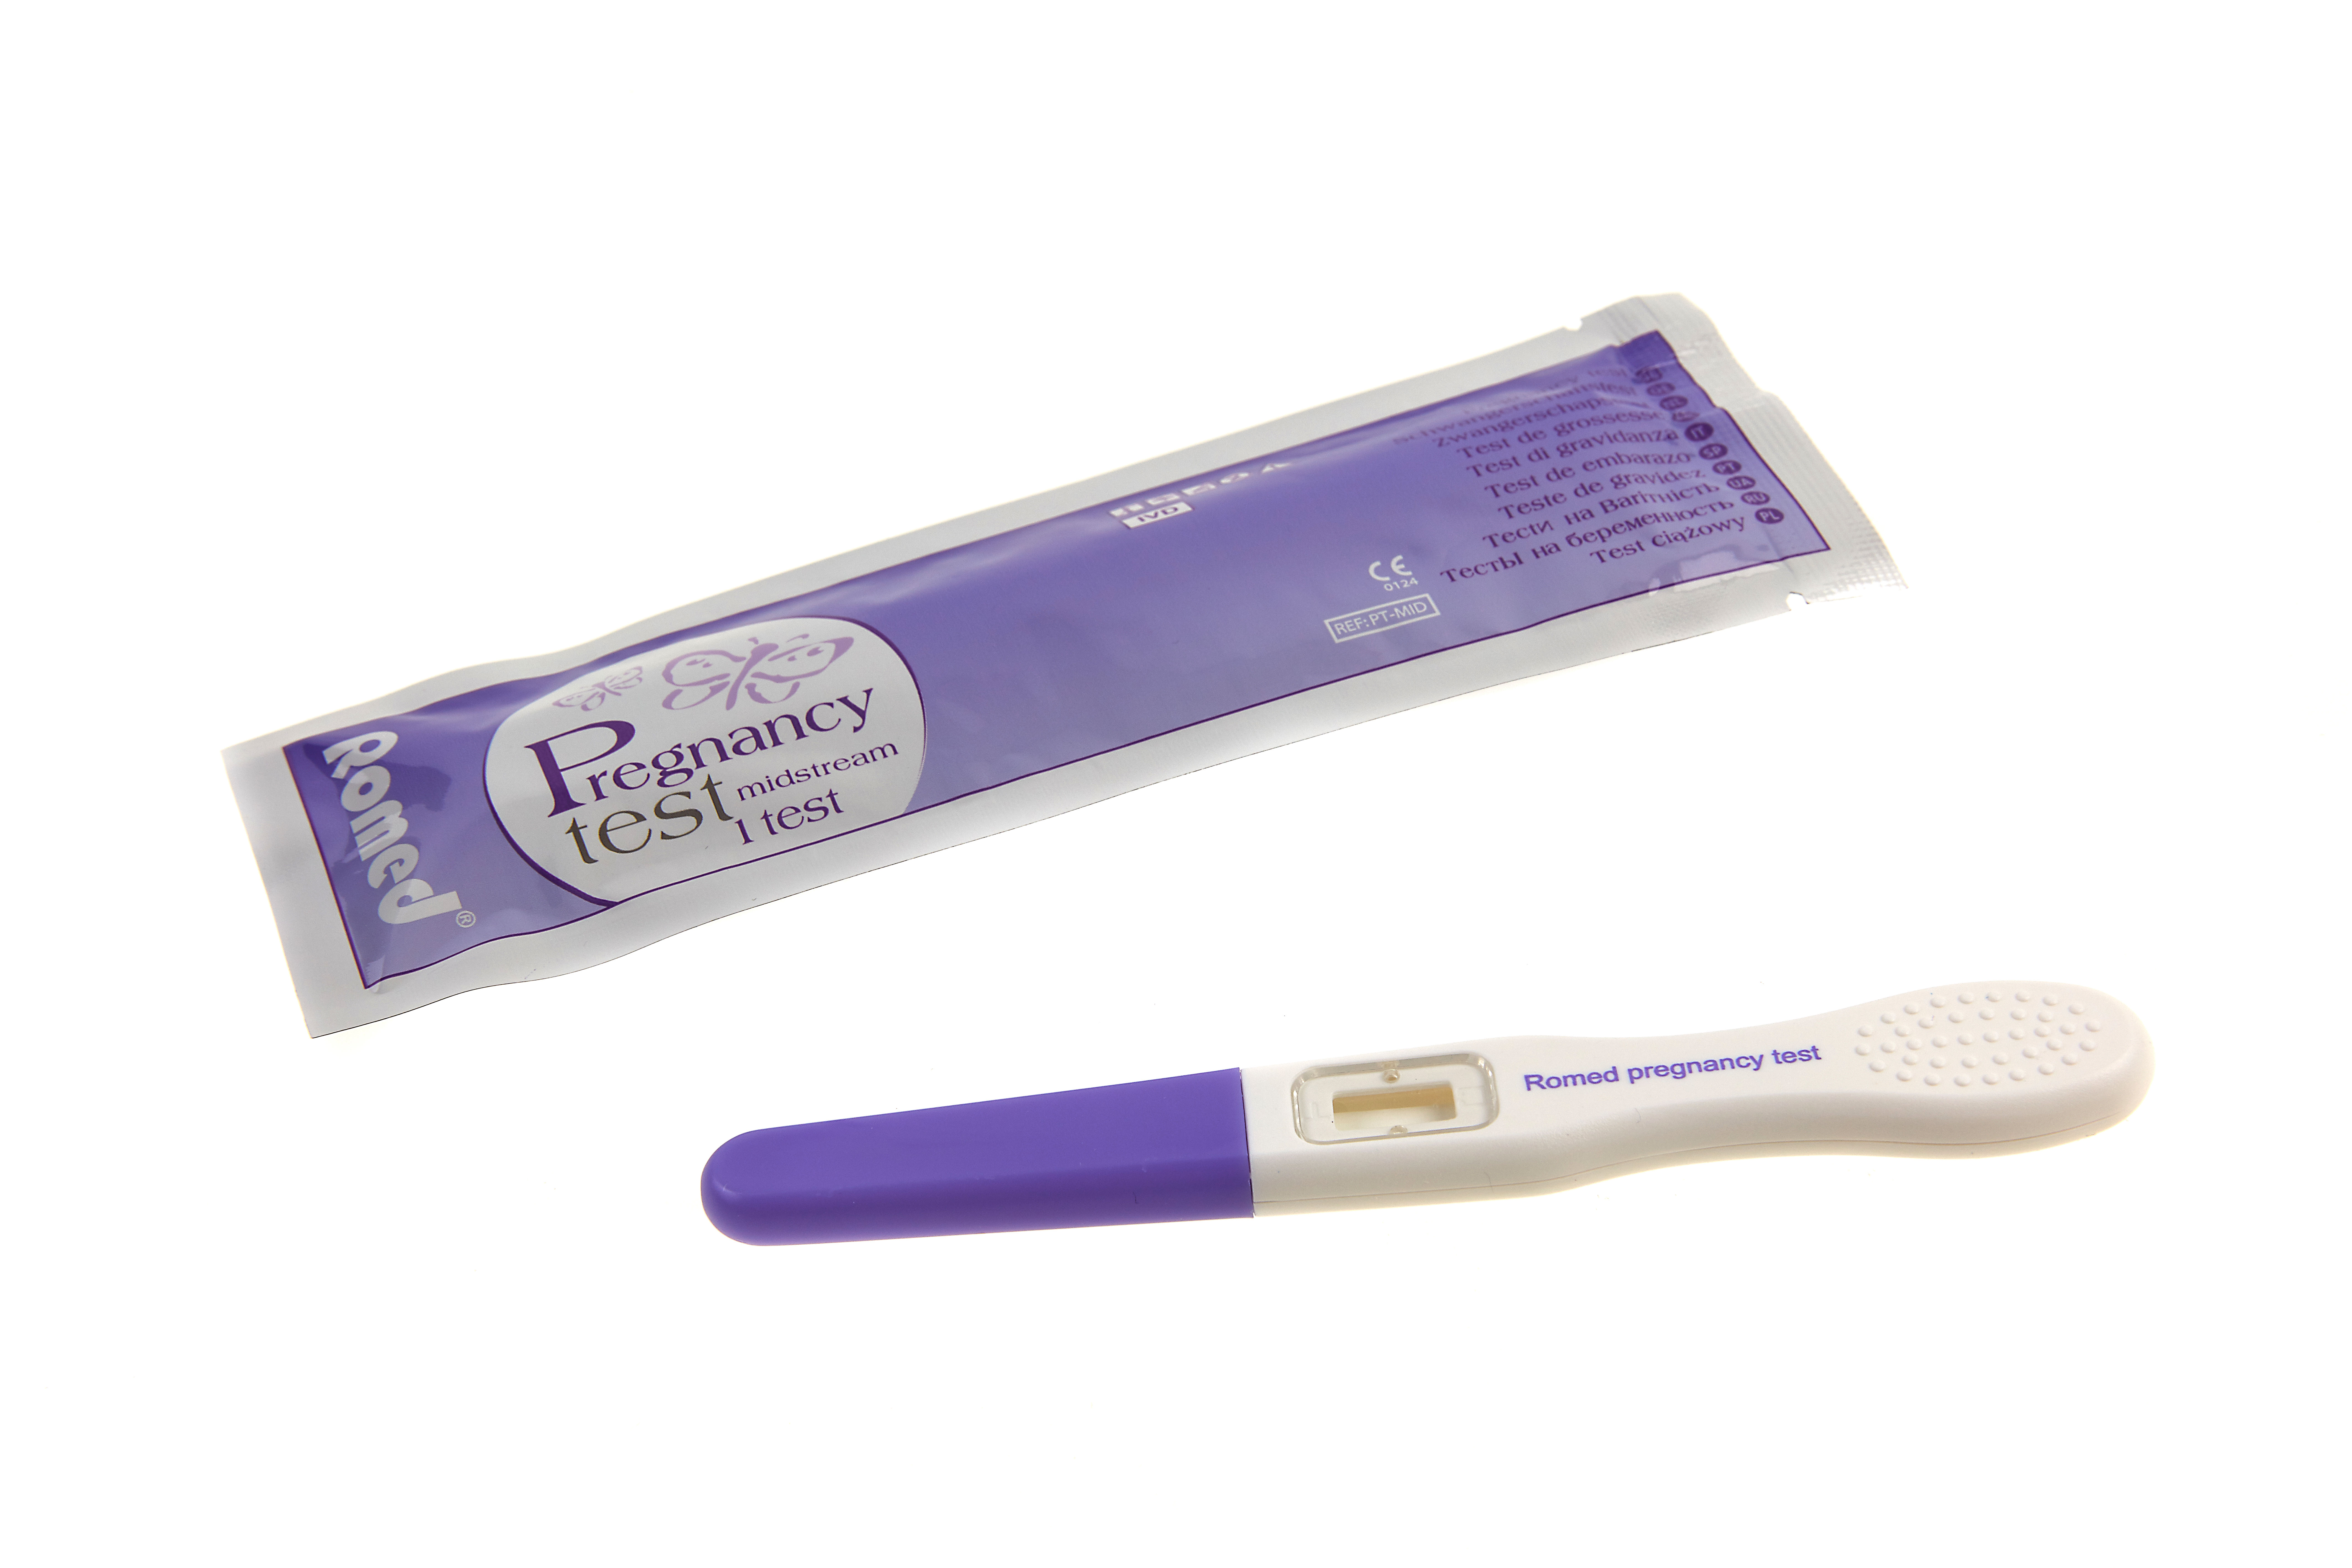 PT-MID1000 Romed pregnancy tests, midstream type, bulk packing, 1.000 pcs in a carton.